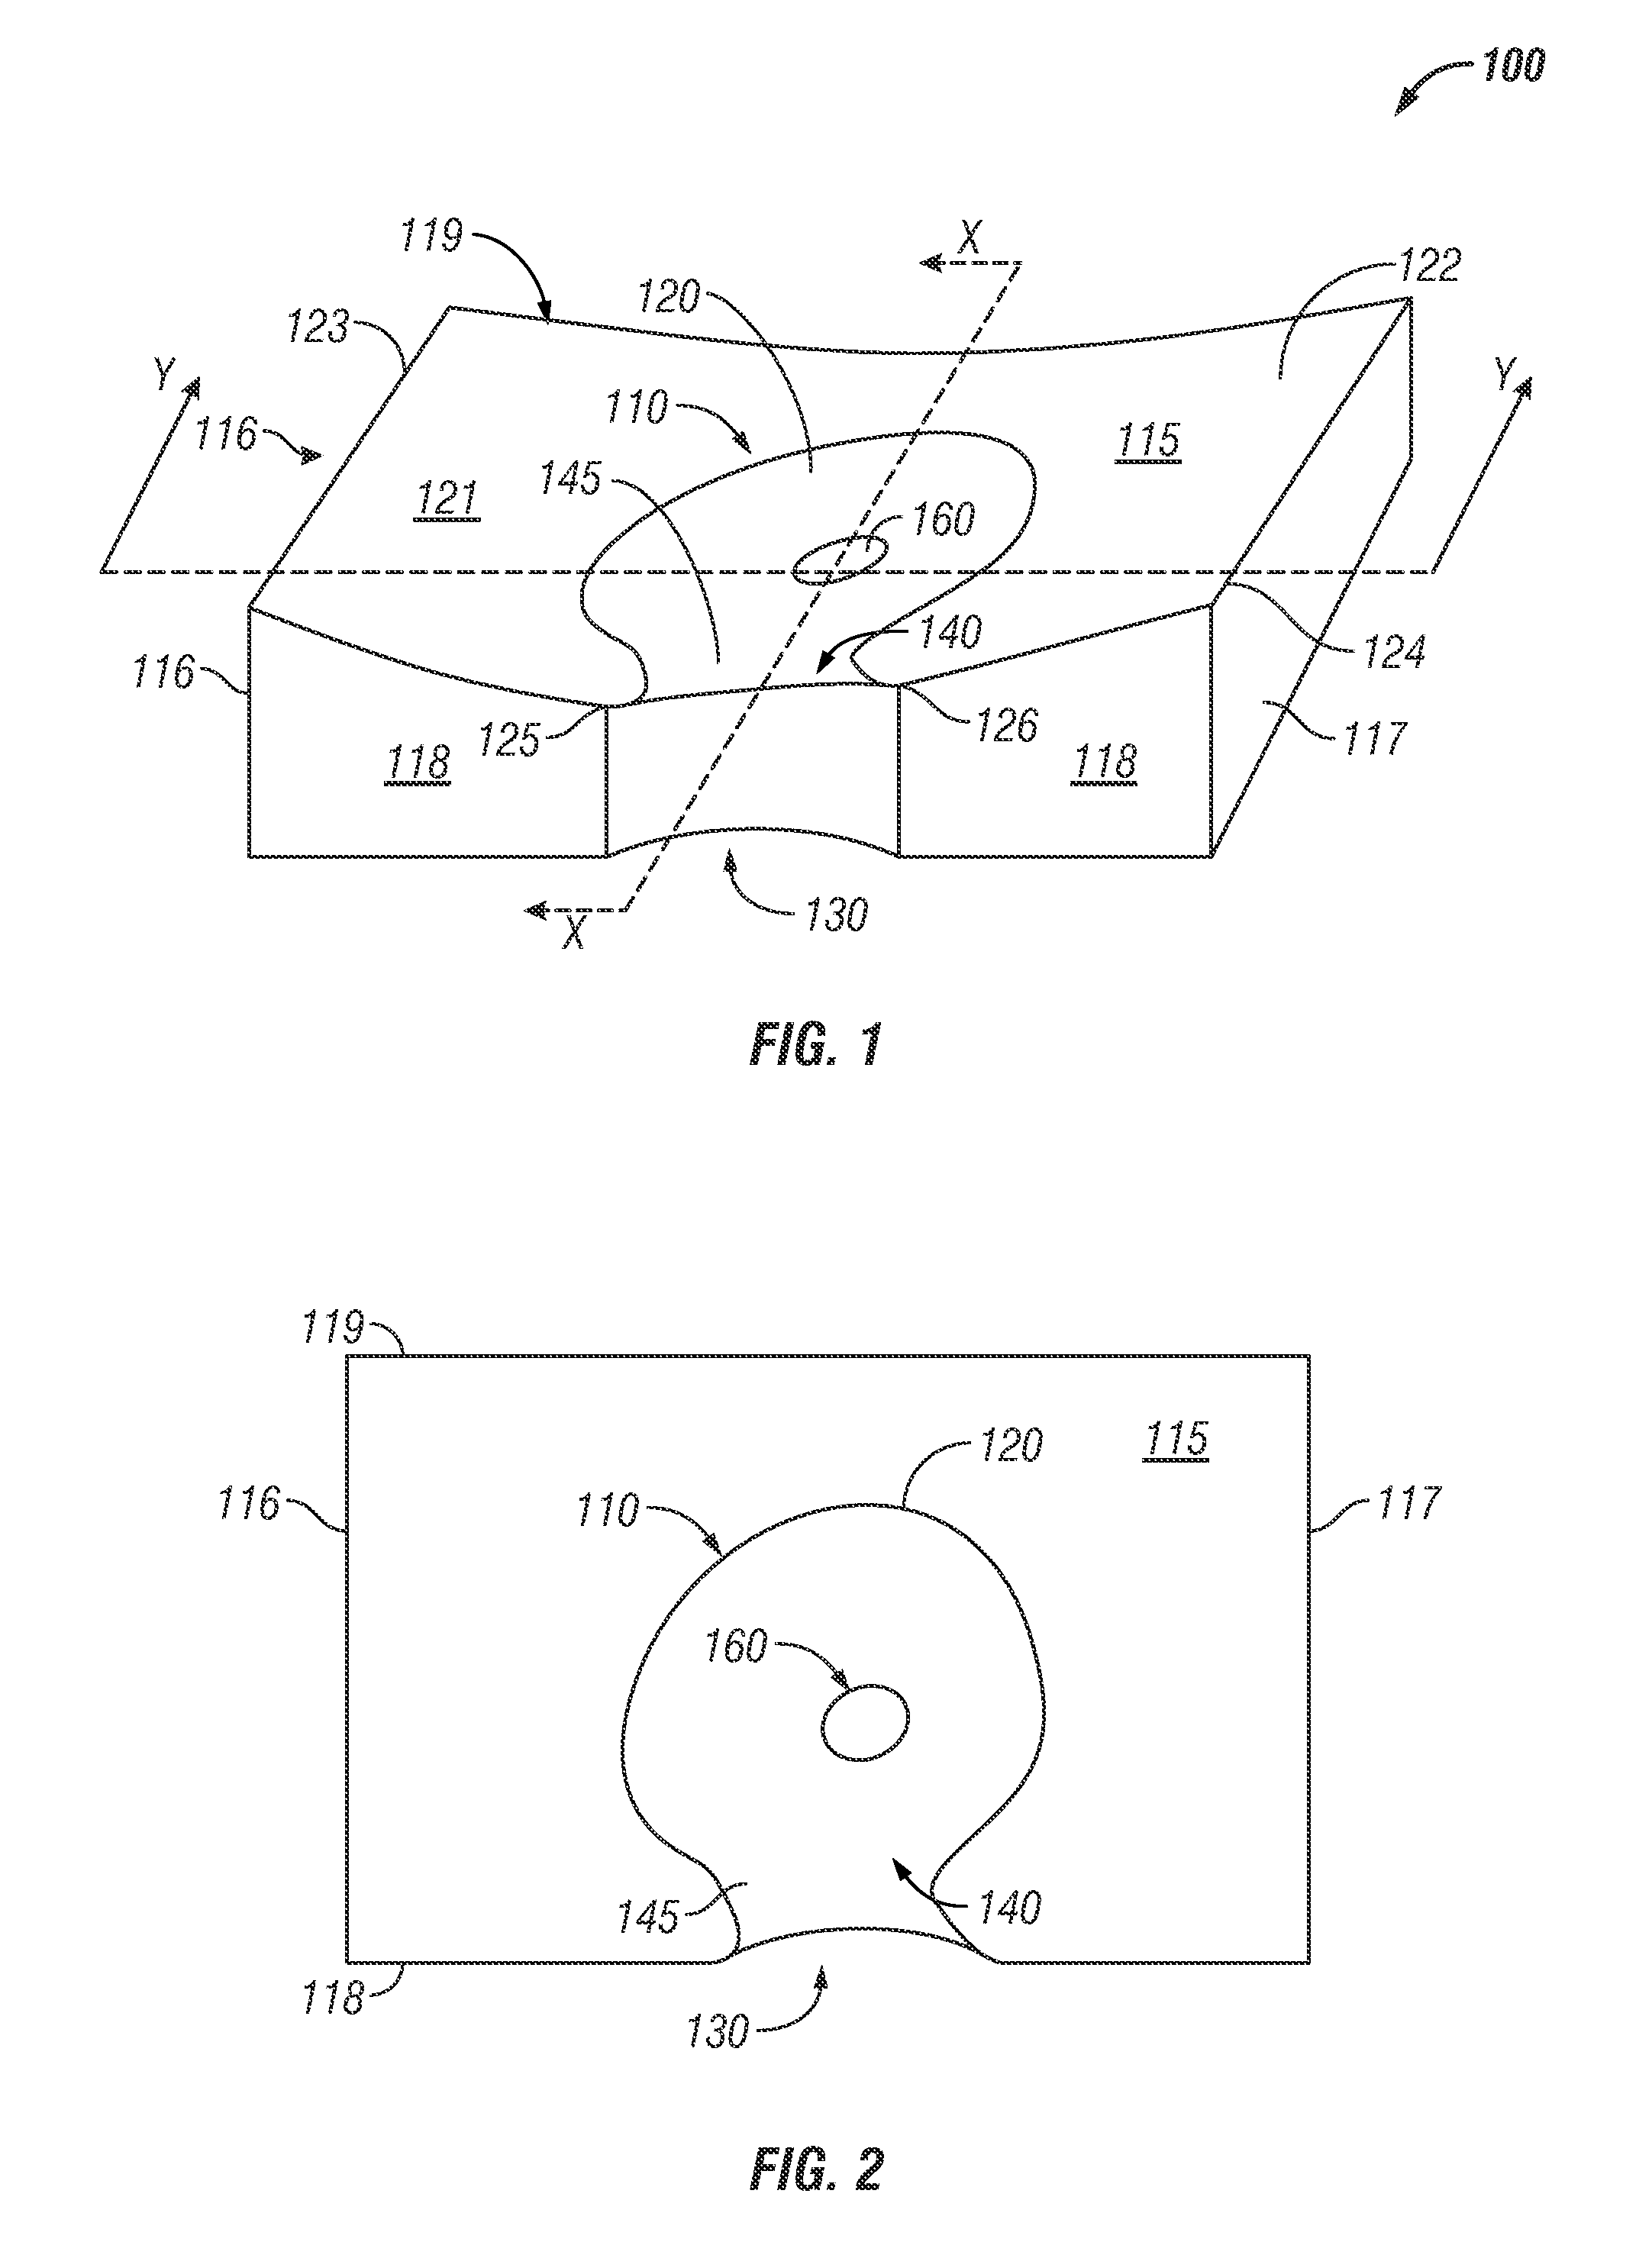 Pillow for Facilitating the Lateral Sniff Position for Improved Airway Management